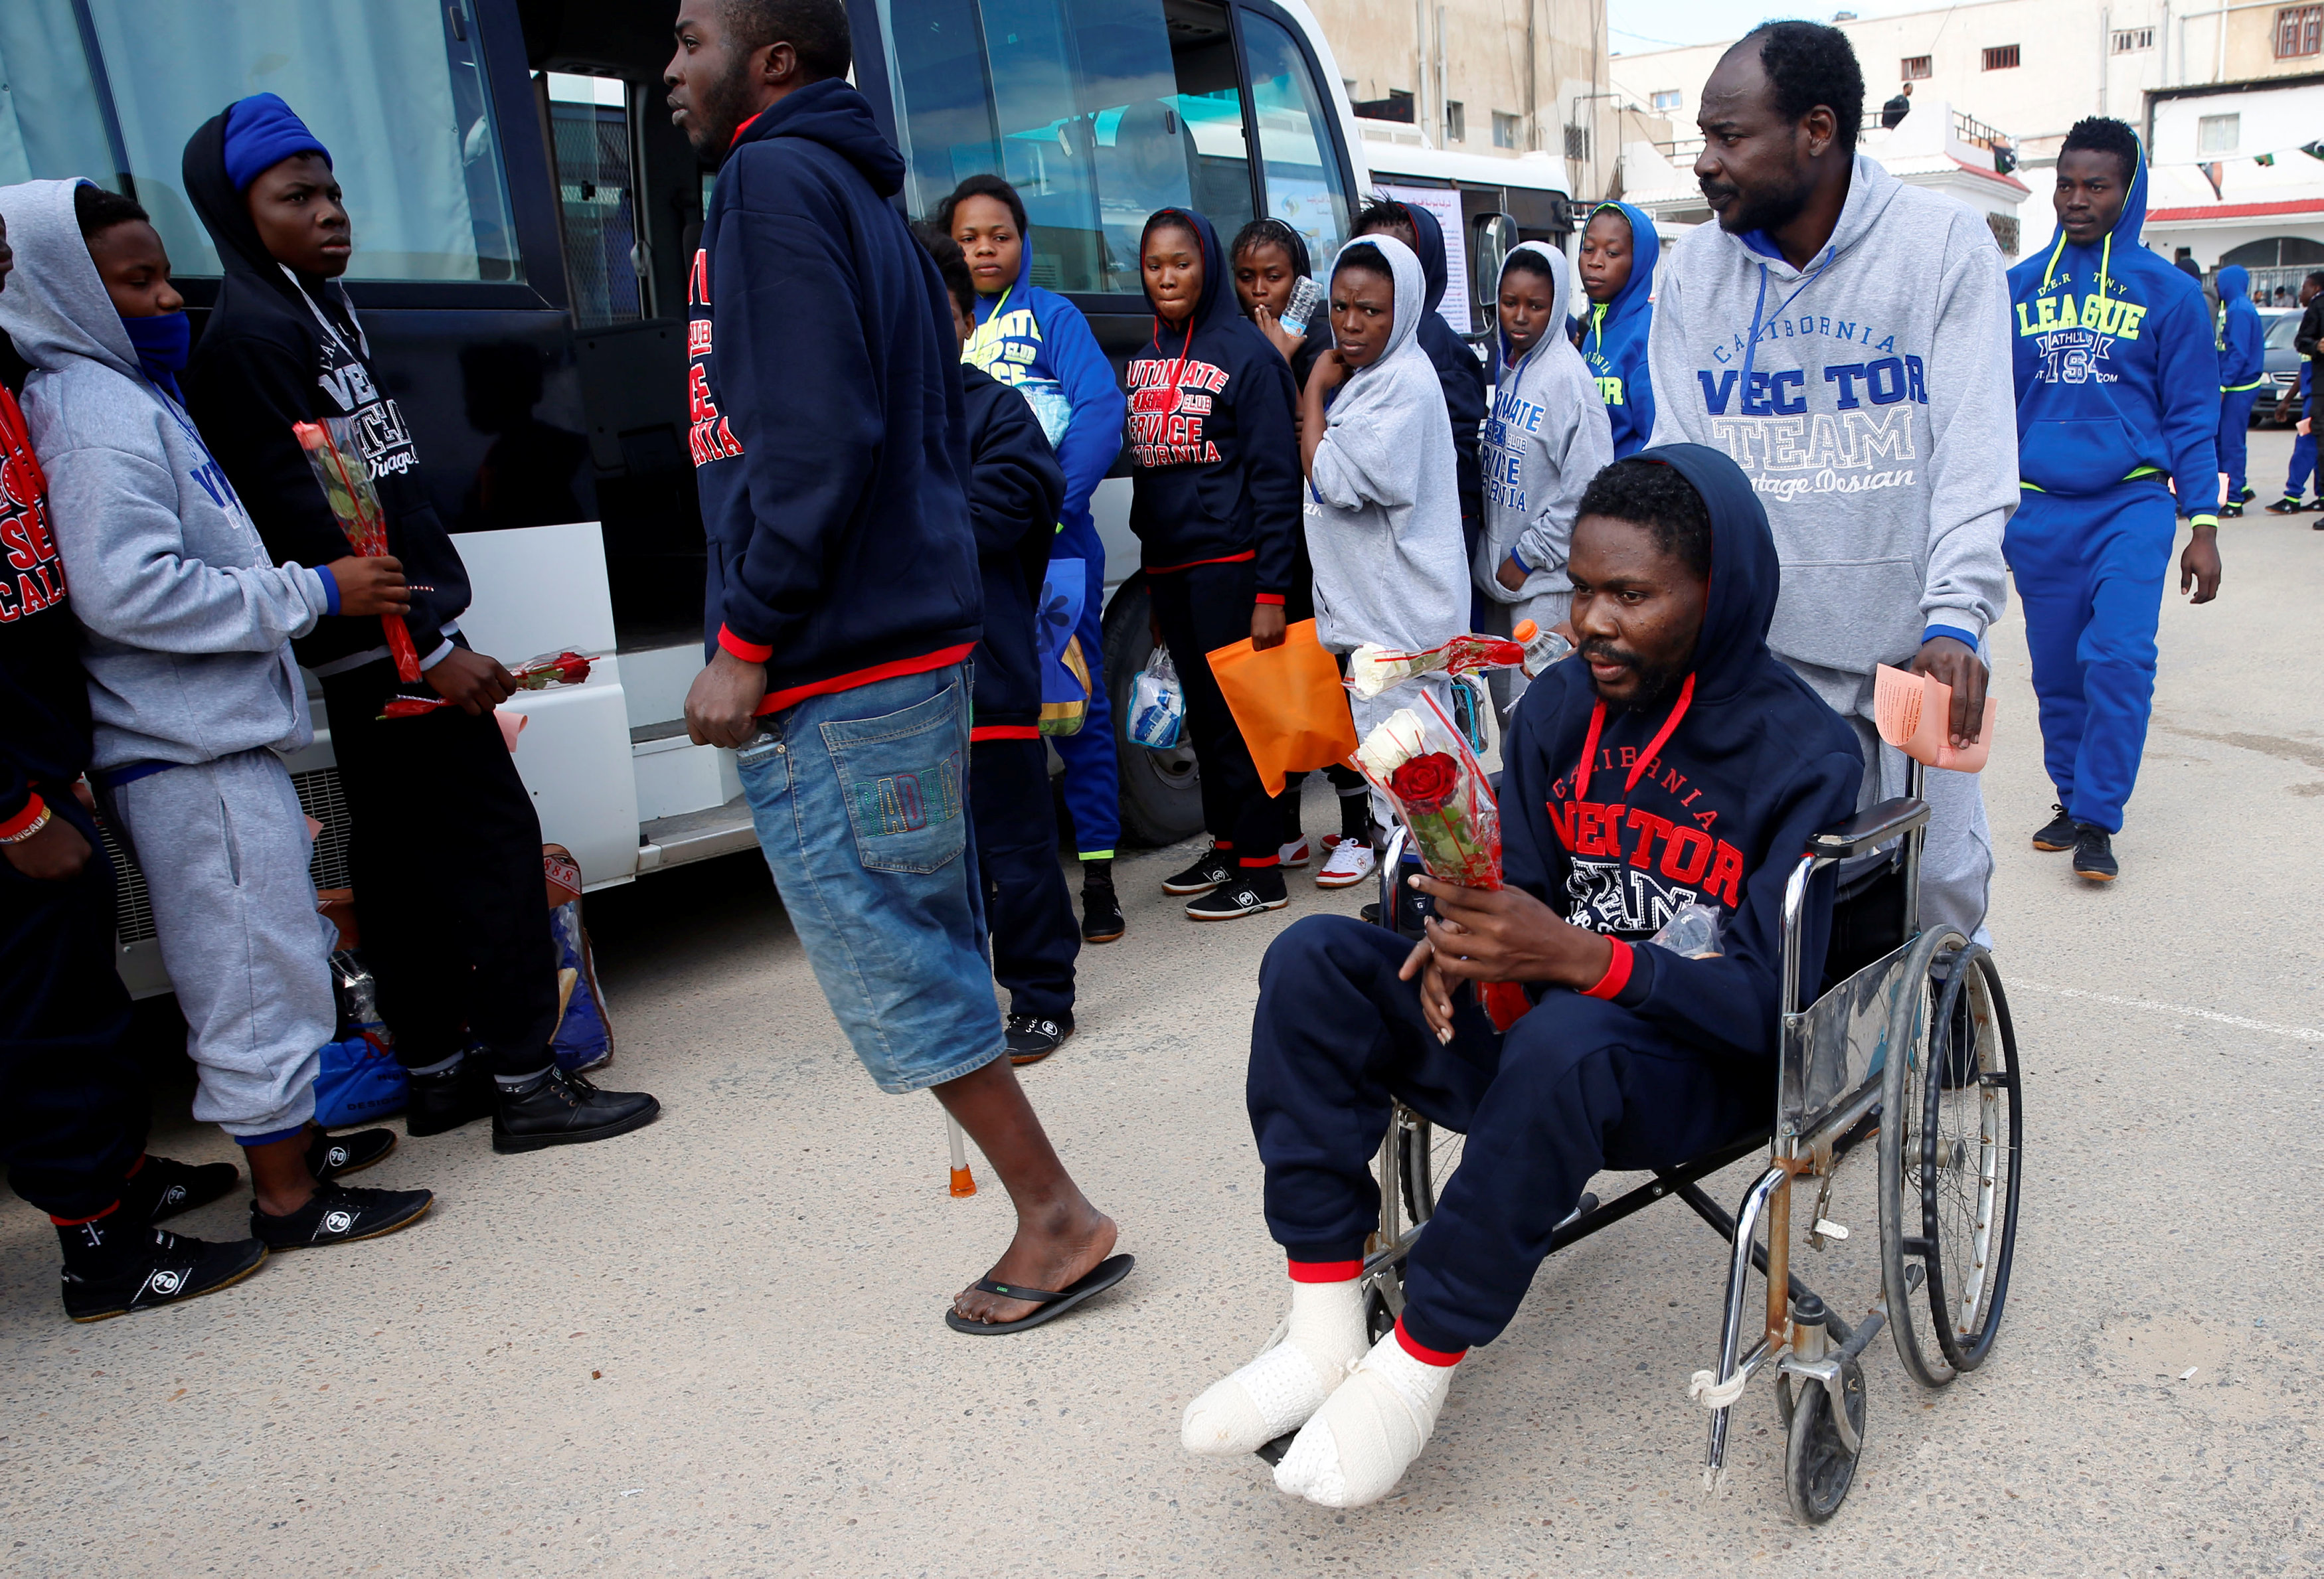 Tall order to stop abuse of African migrants in Libya